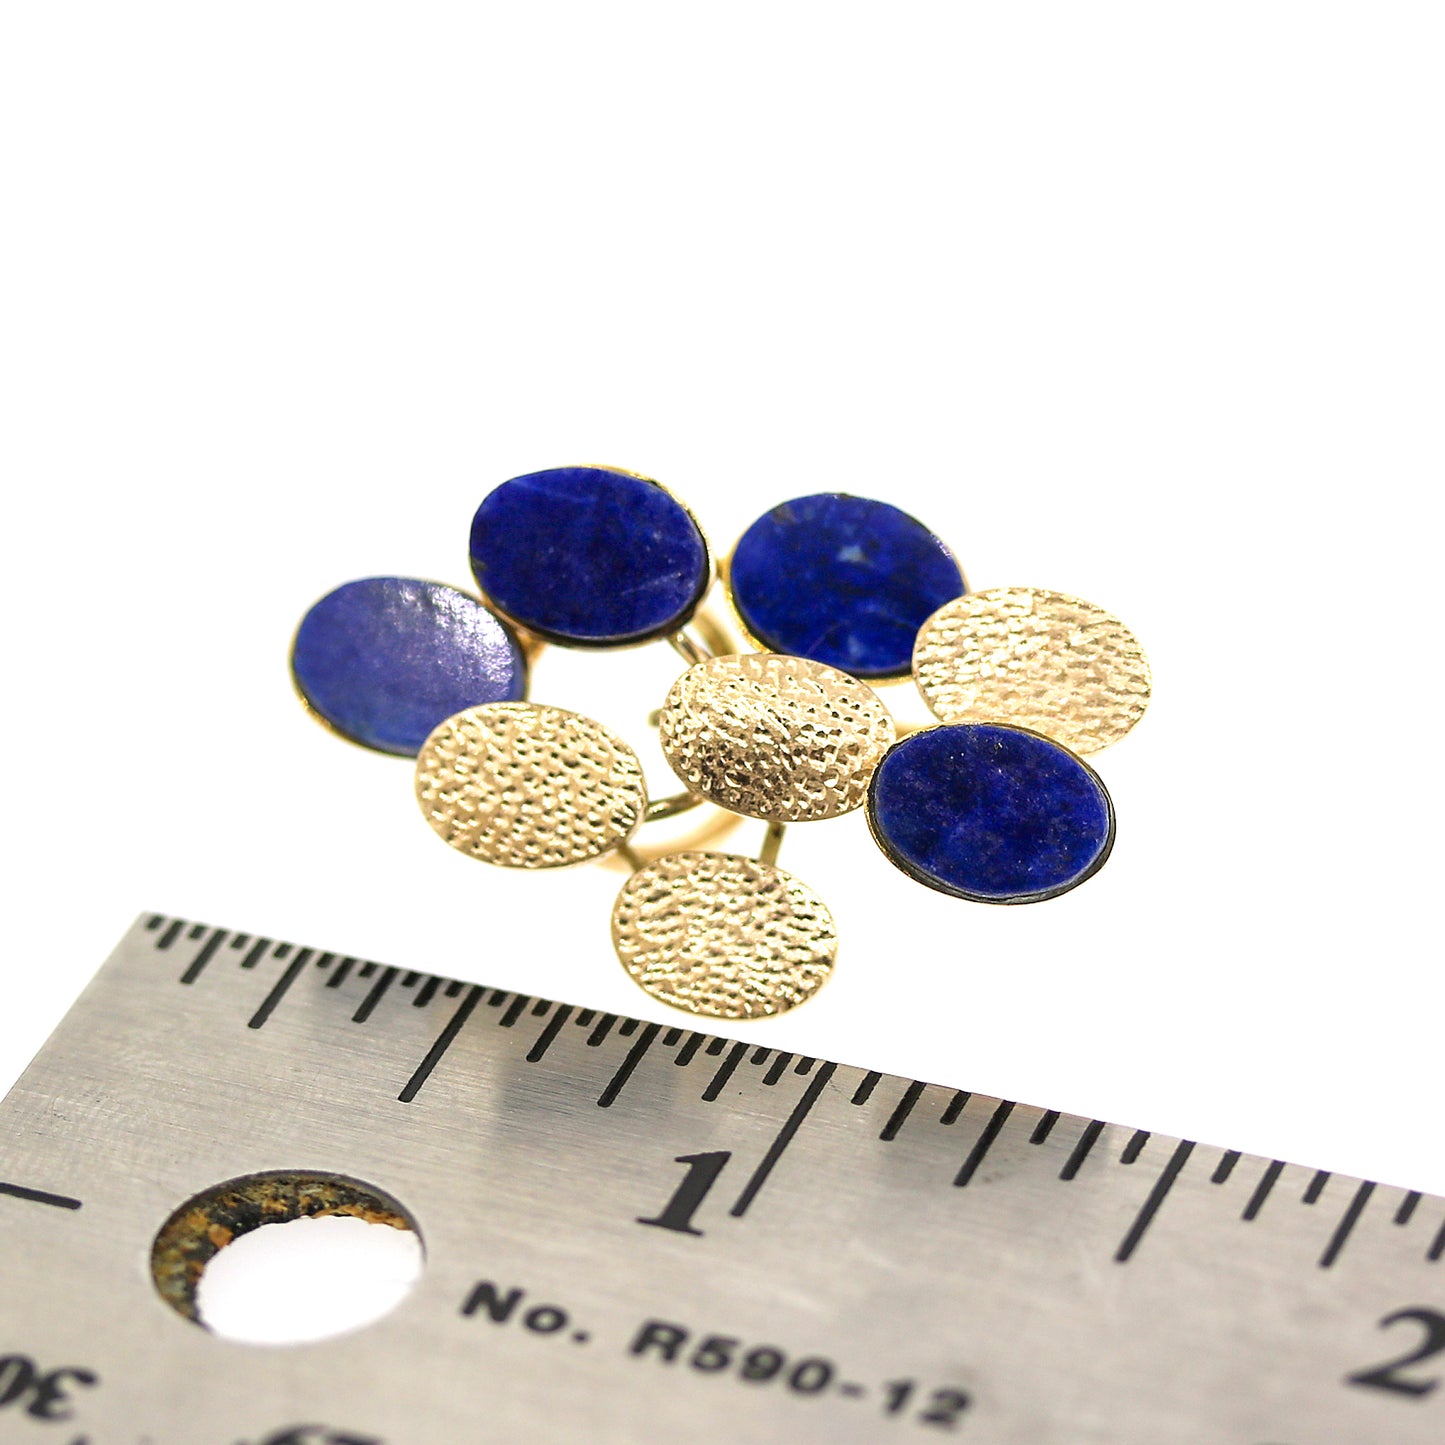 Lapis and Textured Yellow Gold Bubbles Earrings